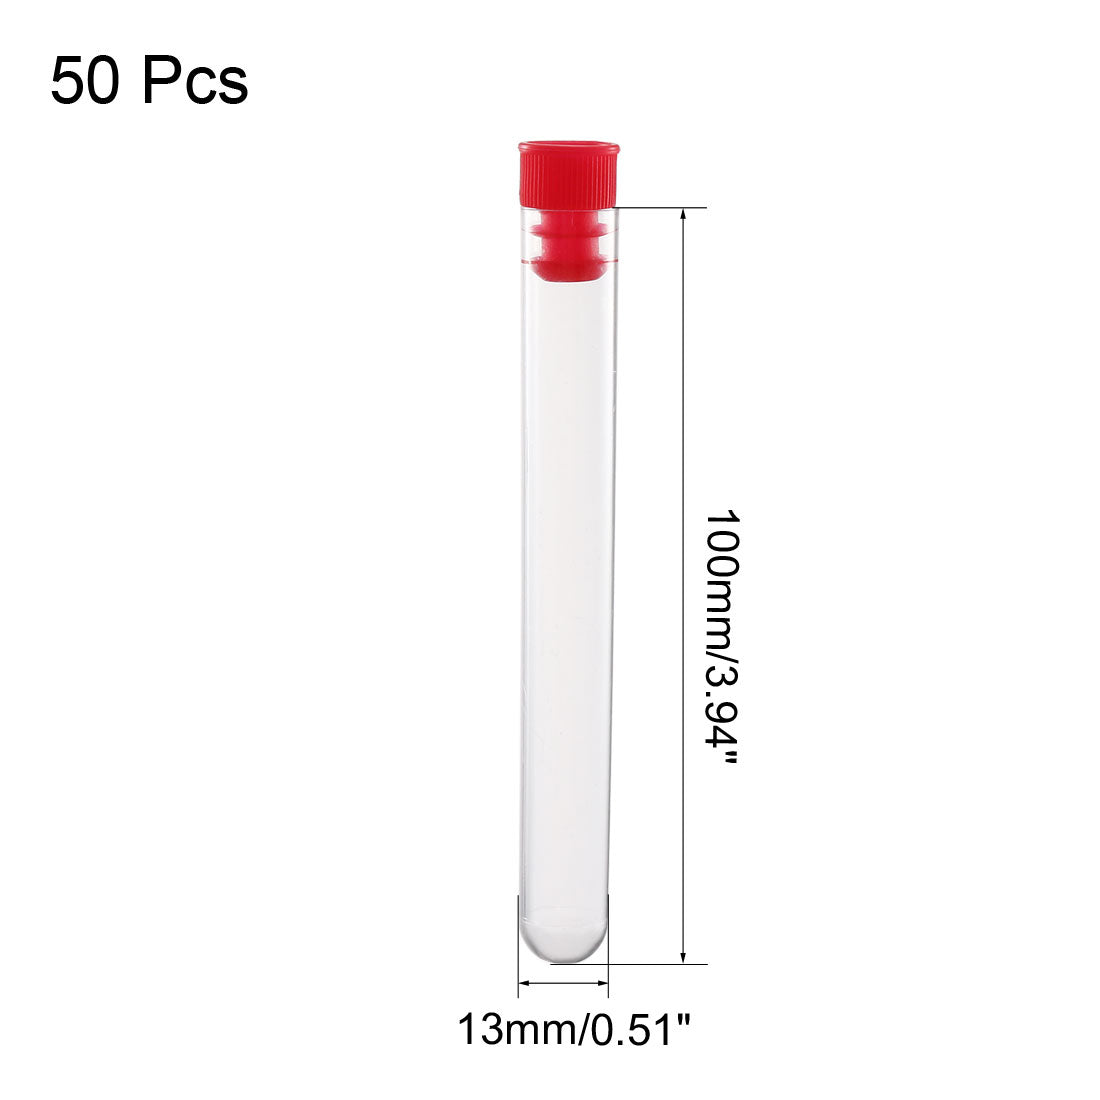 uxcell Uxcell 100 Pcs Centrifuge Test Tube Round Bottom Polystyrene with Red Cap